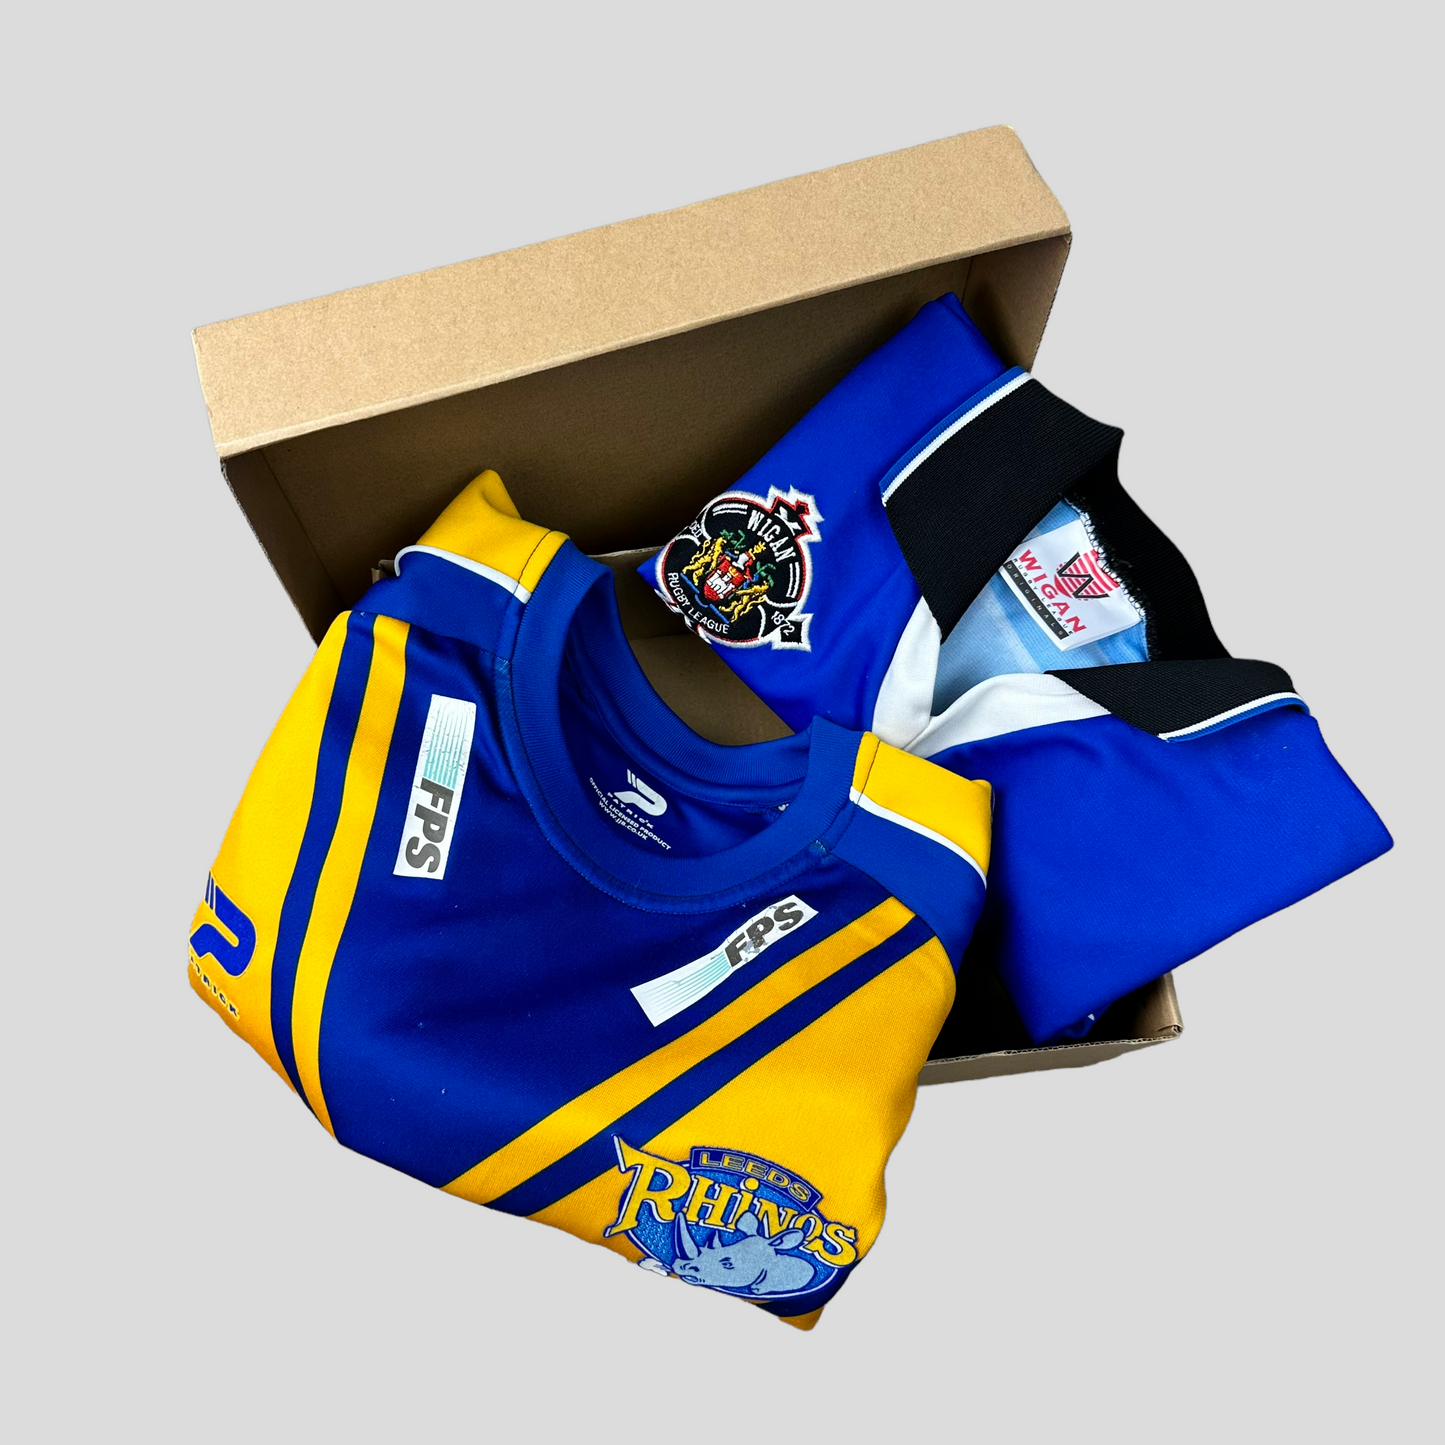 Rugby League Double Bubble Mystery Box